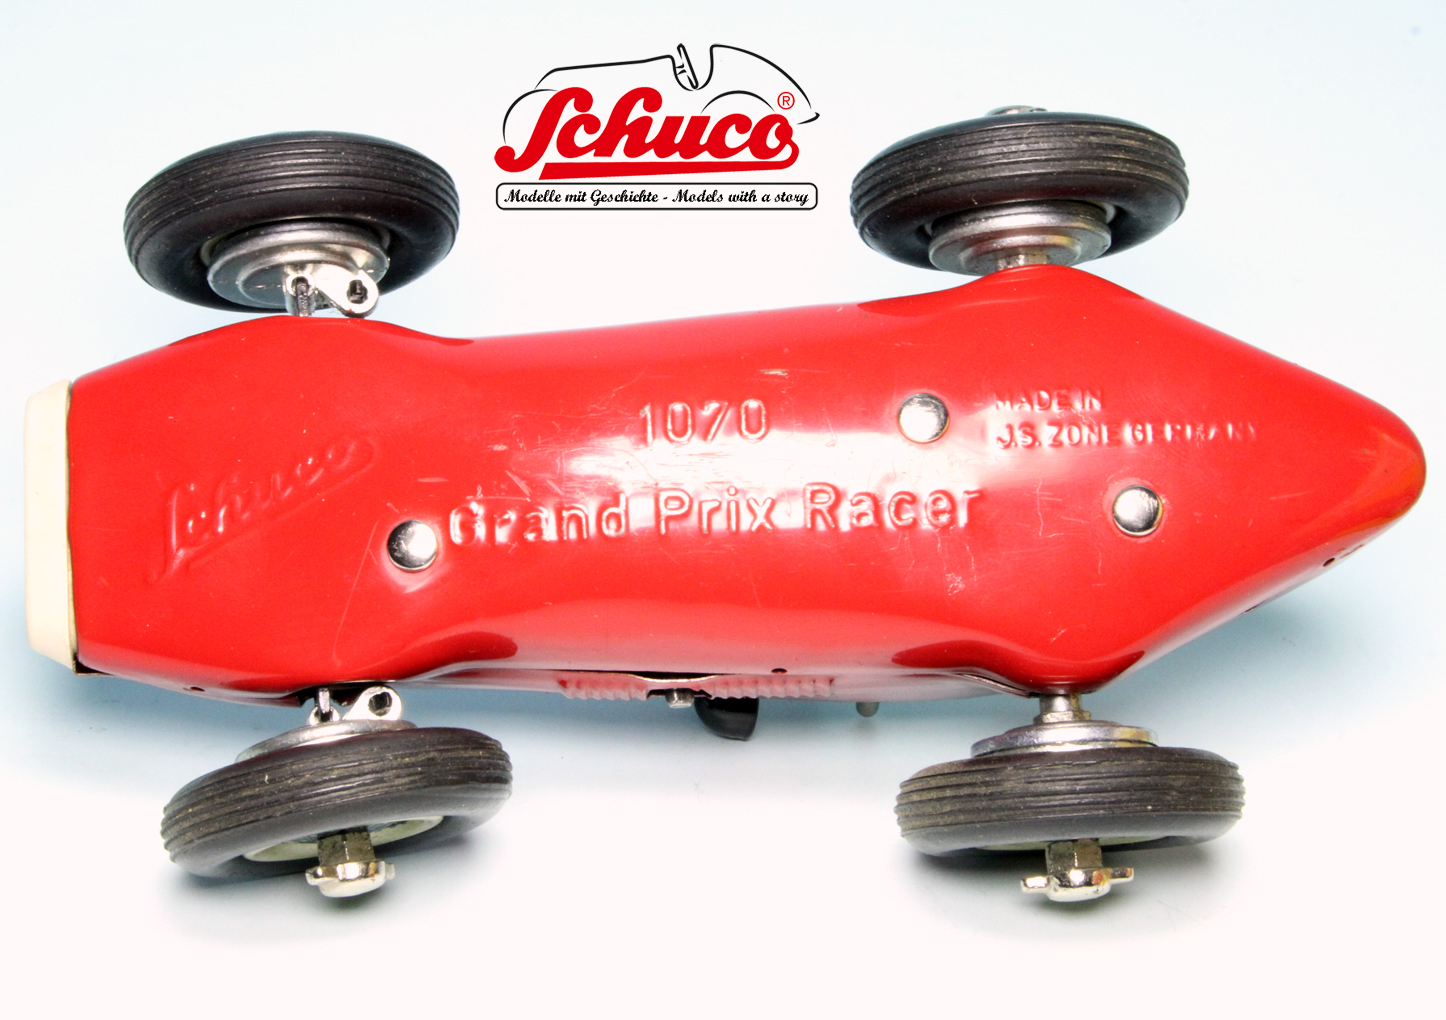 Grand-Prix-Racer 1070 | Models with a story | Classic Tin Toys